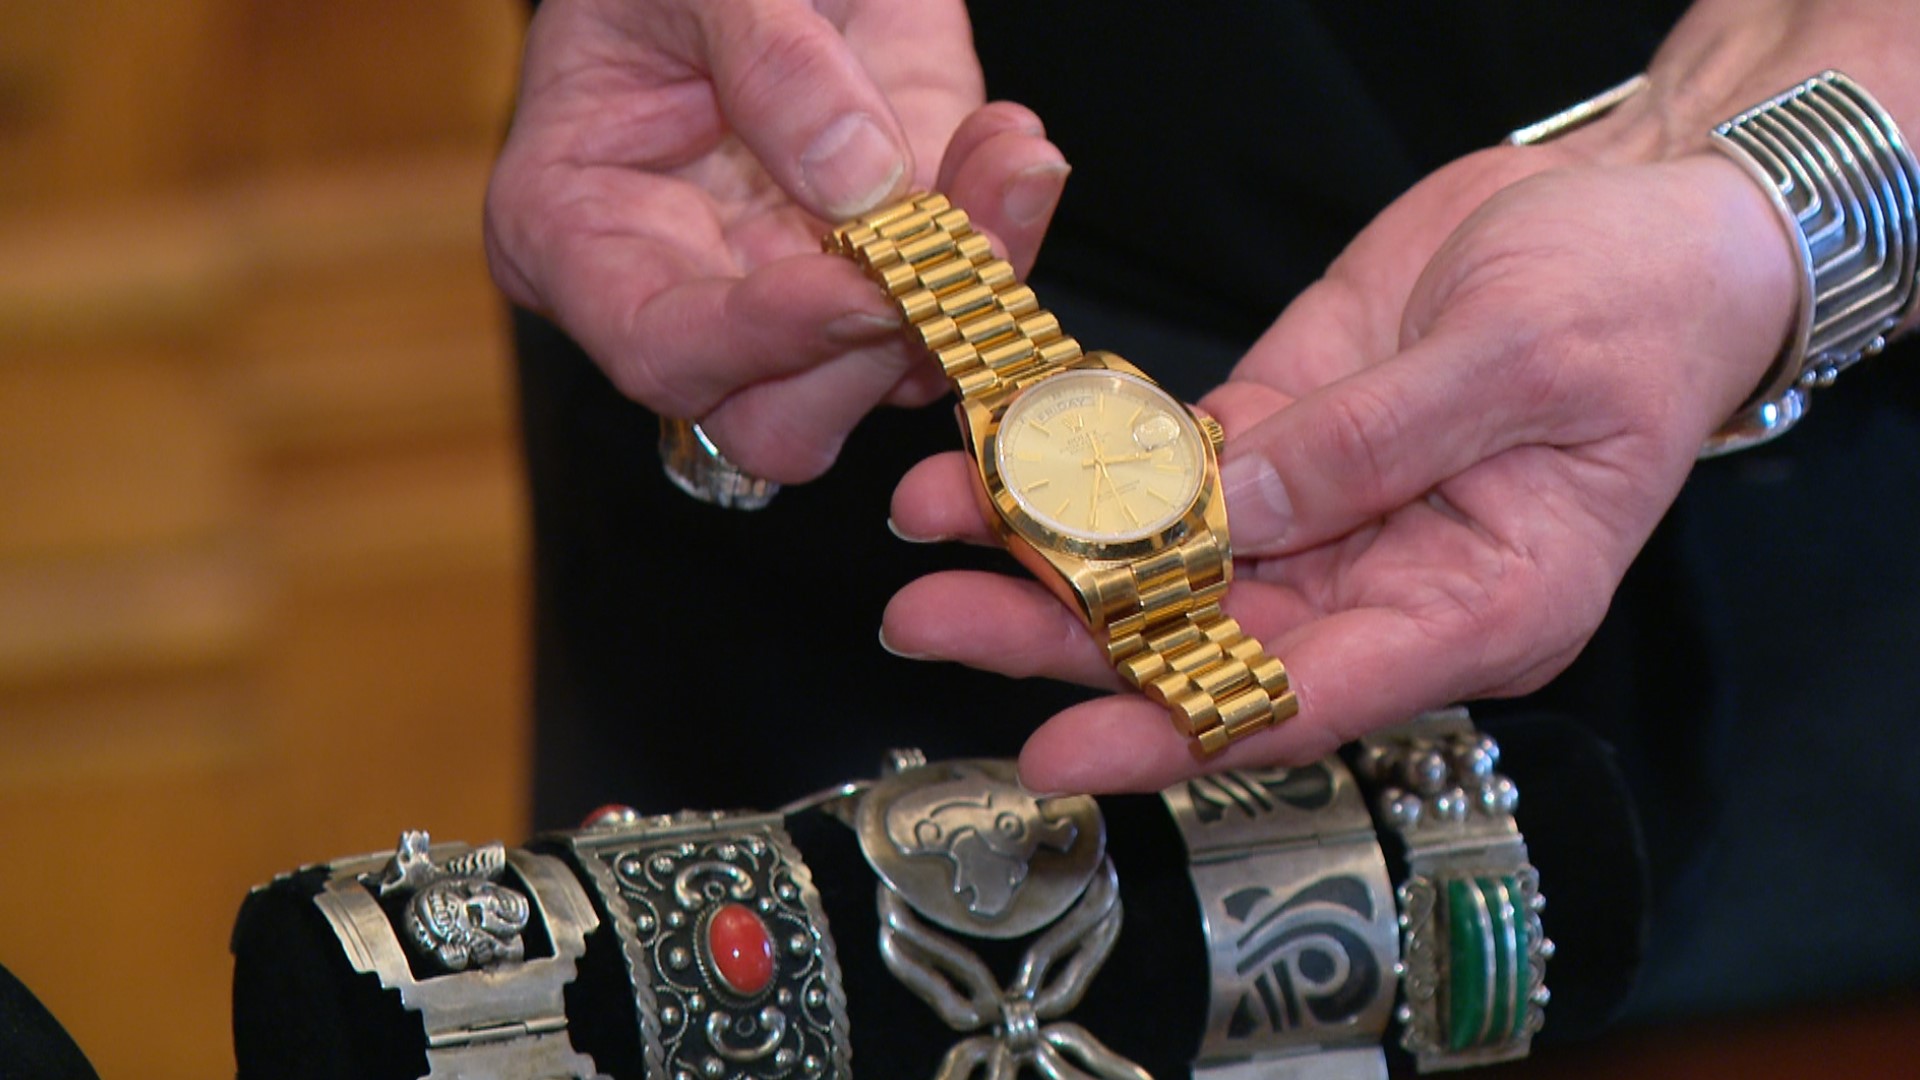 Liz McColm with the Attorney General's office said items wind up in the state's hands because banks can only hold on to abandoned safe deposit boxes for so long.